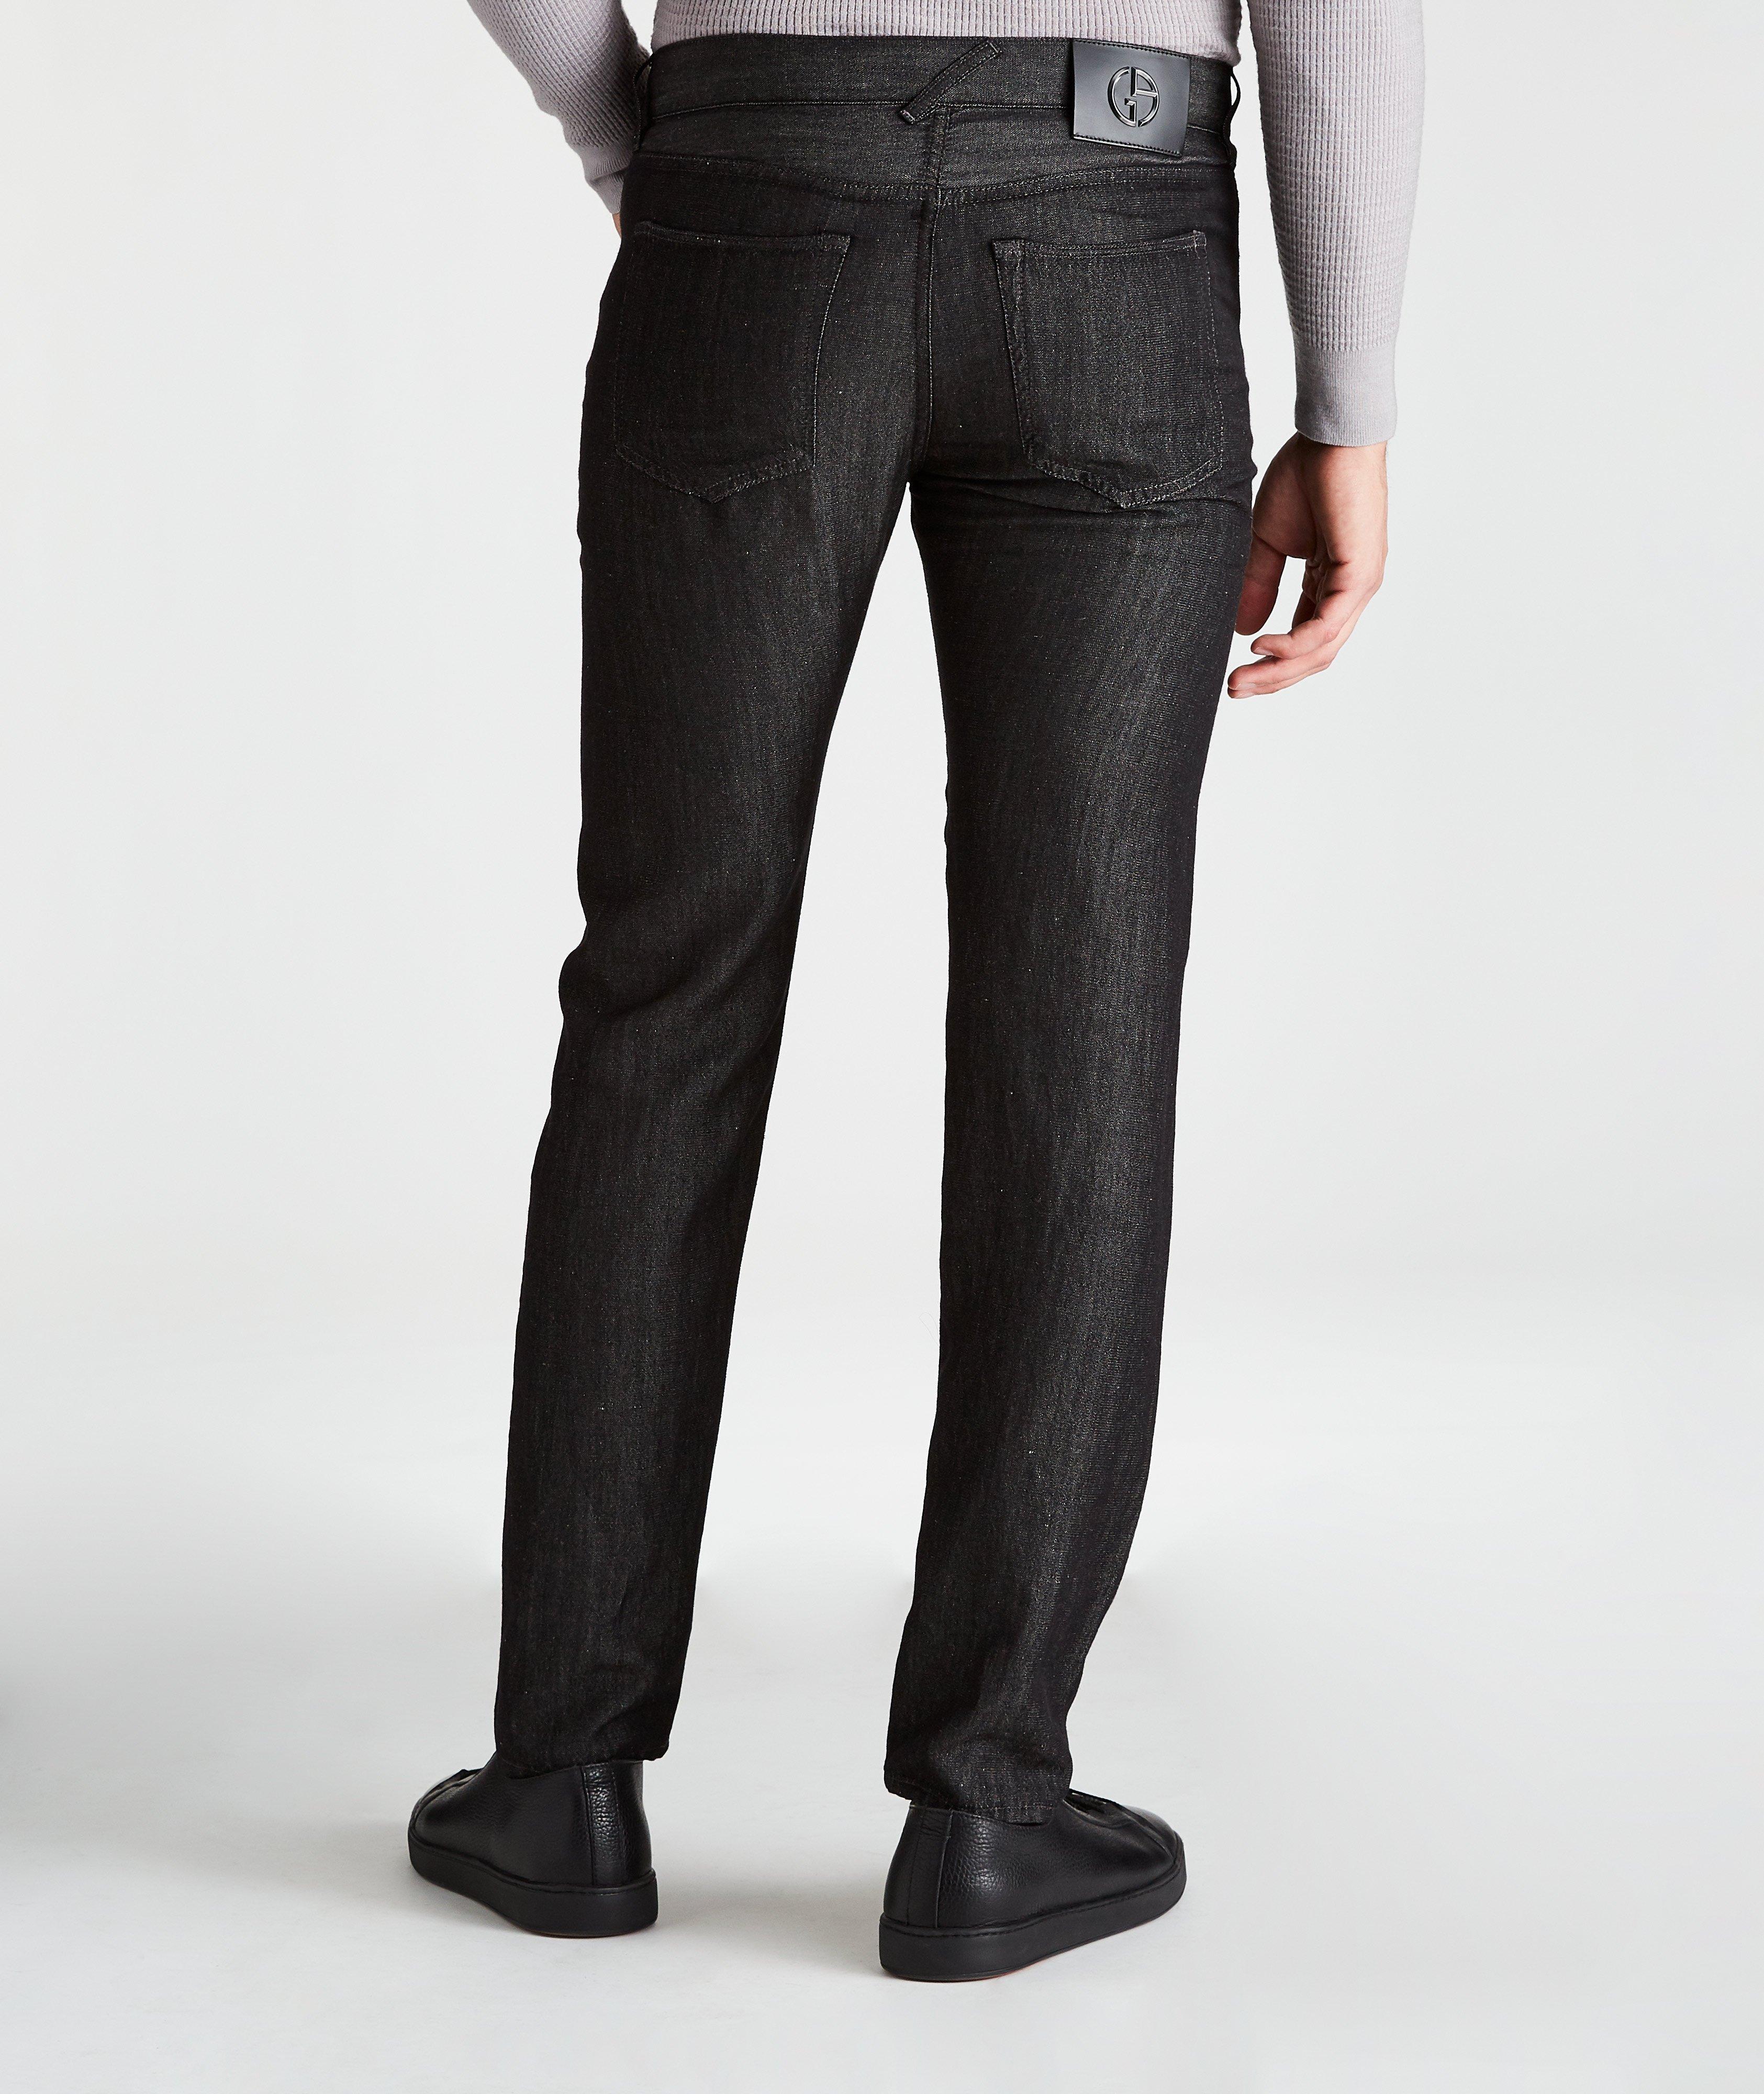 Tapered Wool-Linen Jeans image 1